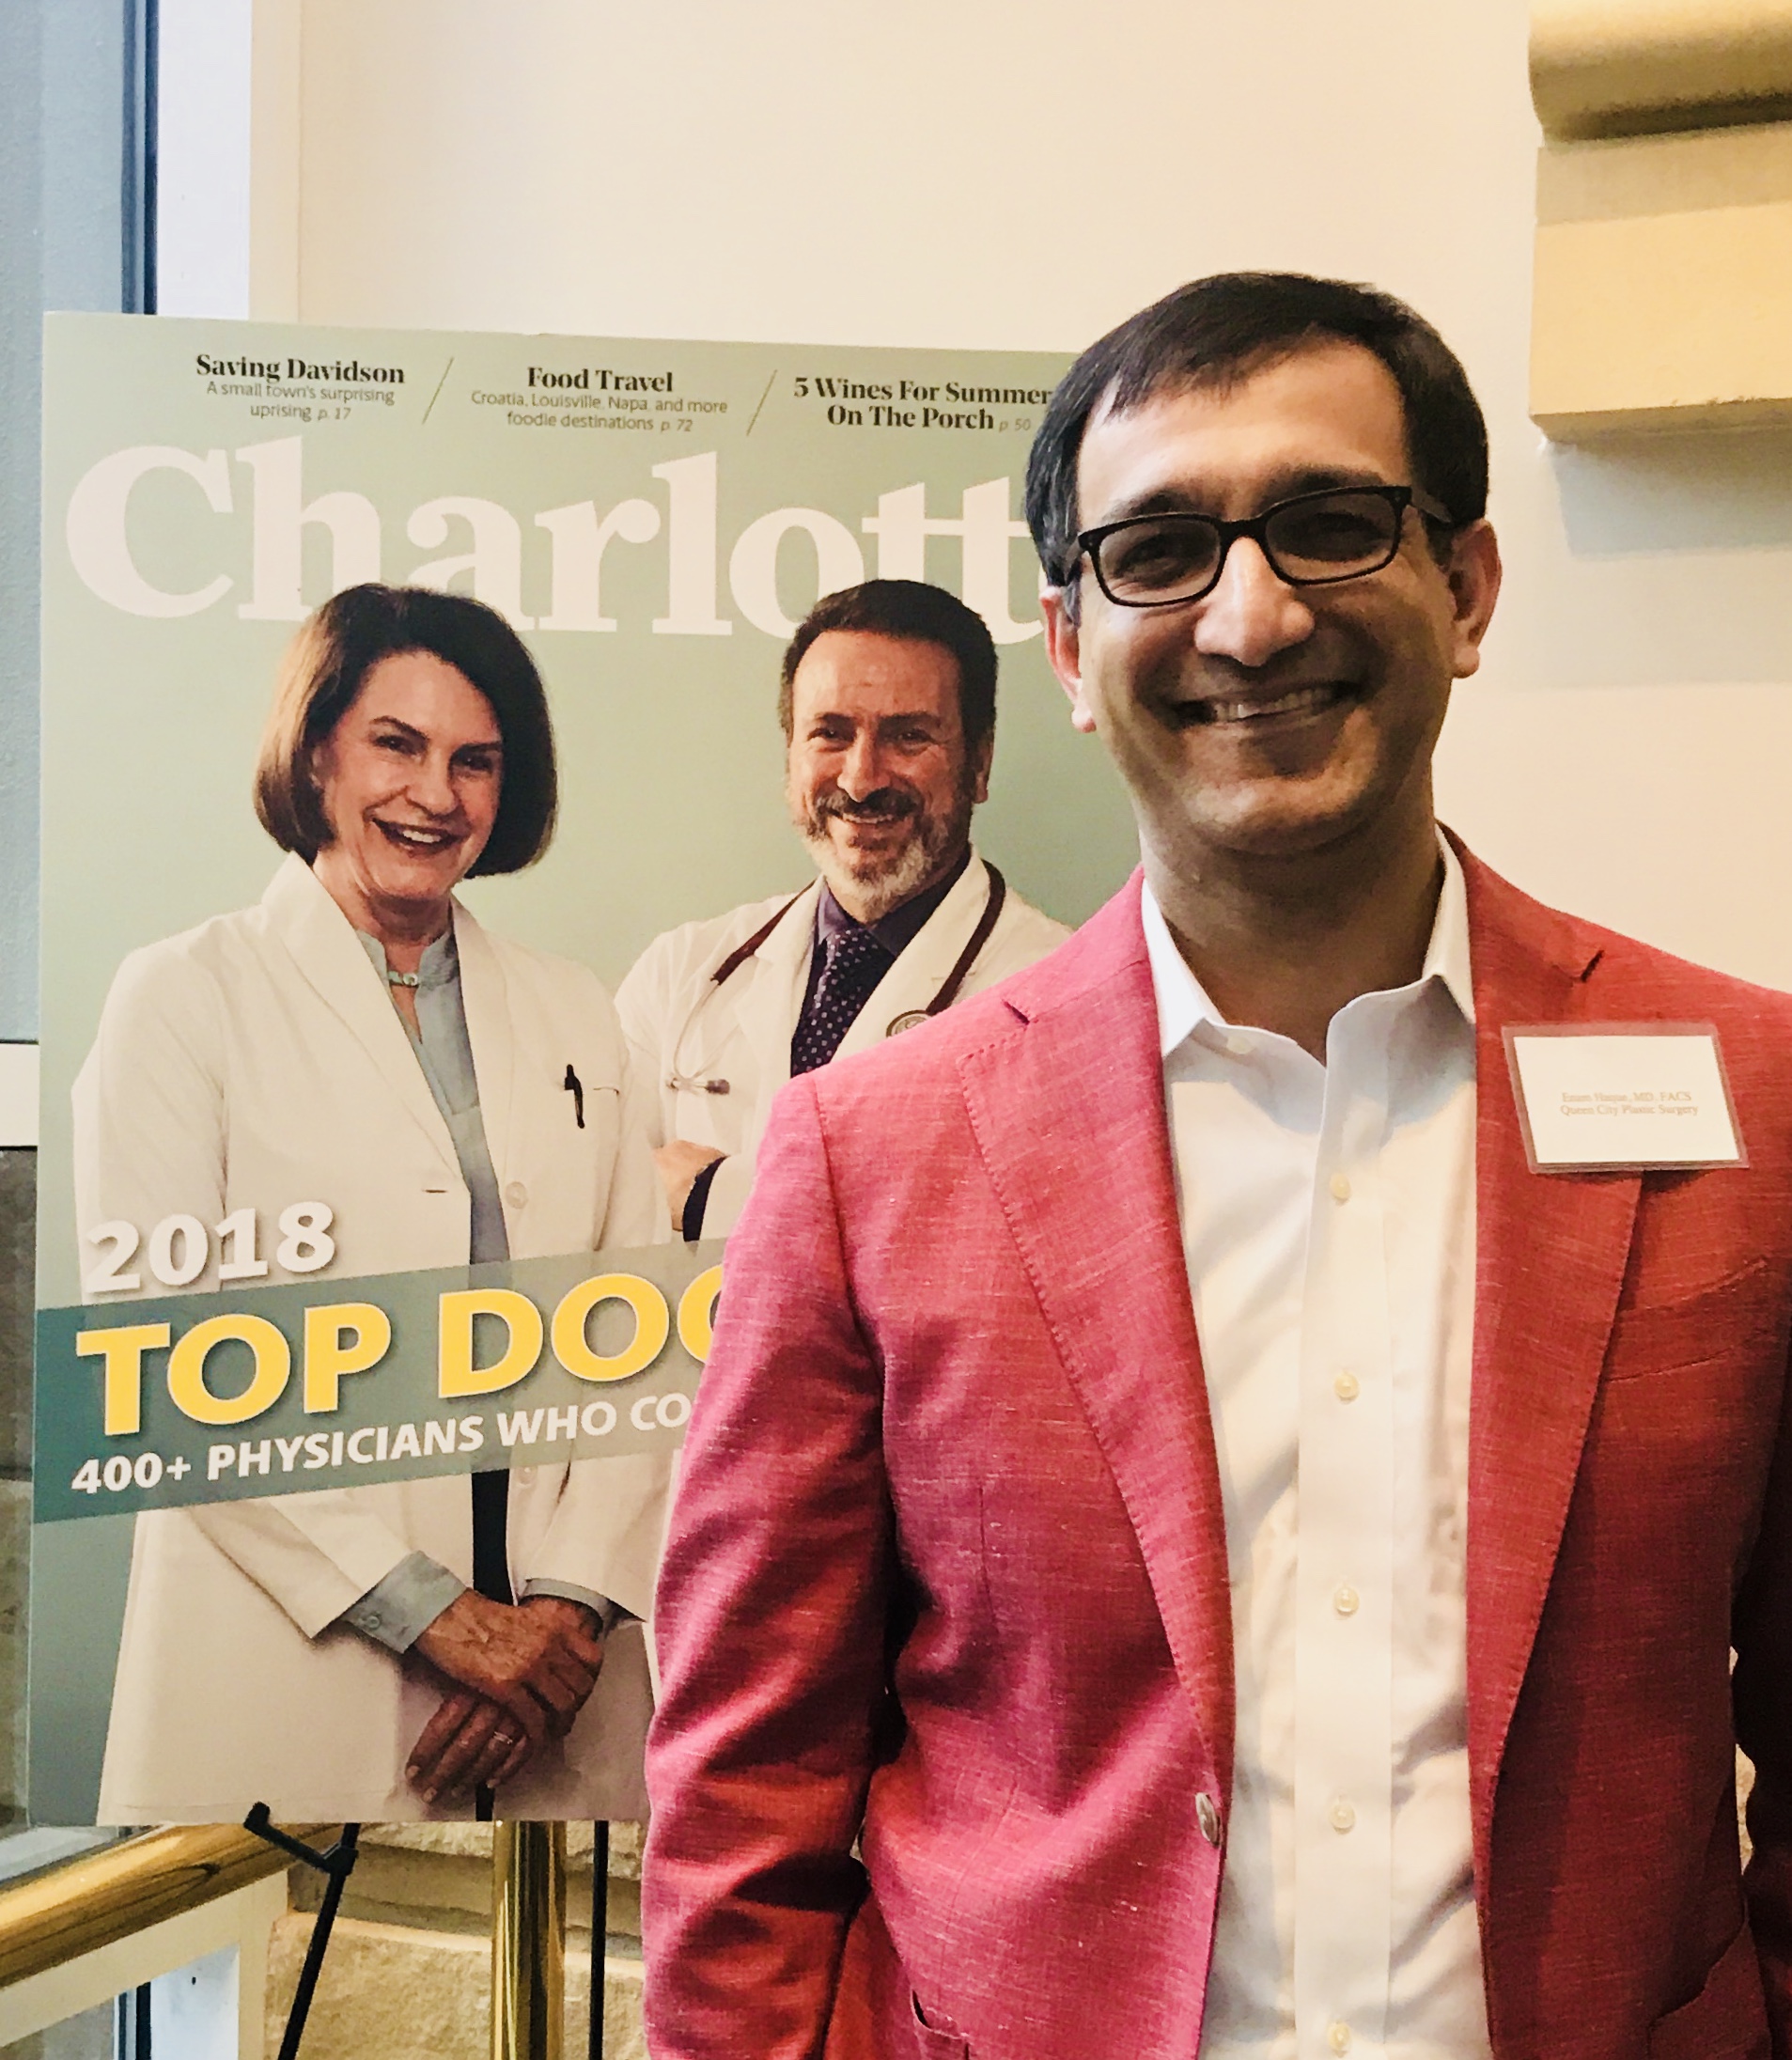 Dr. Haque at the Top Doc Awards